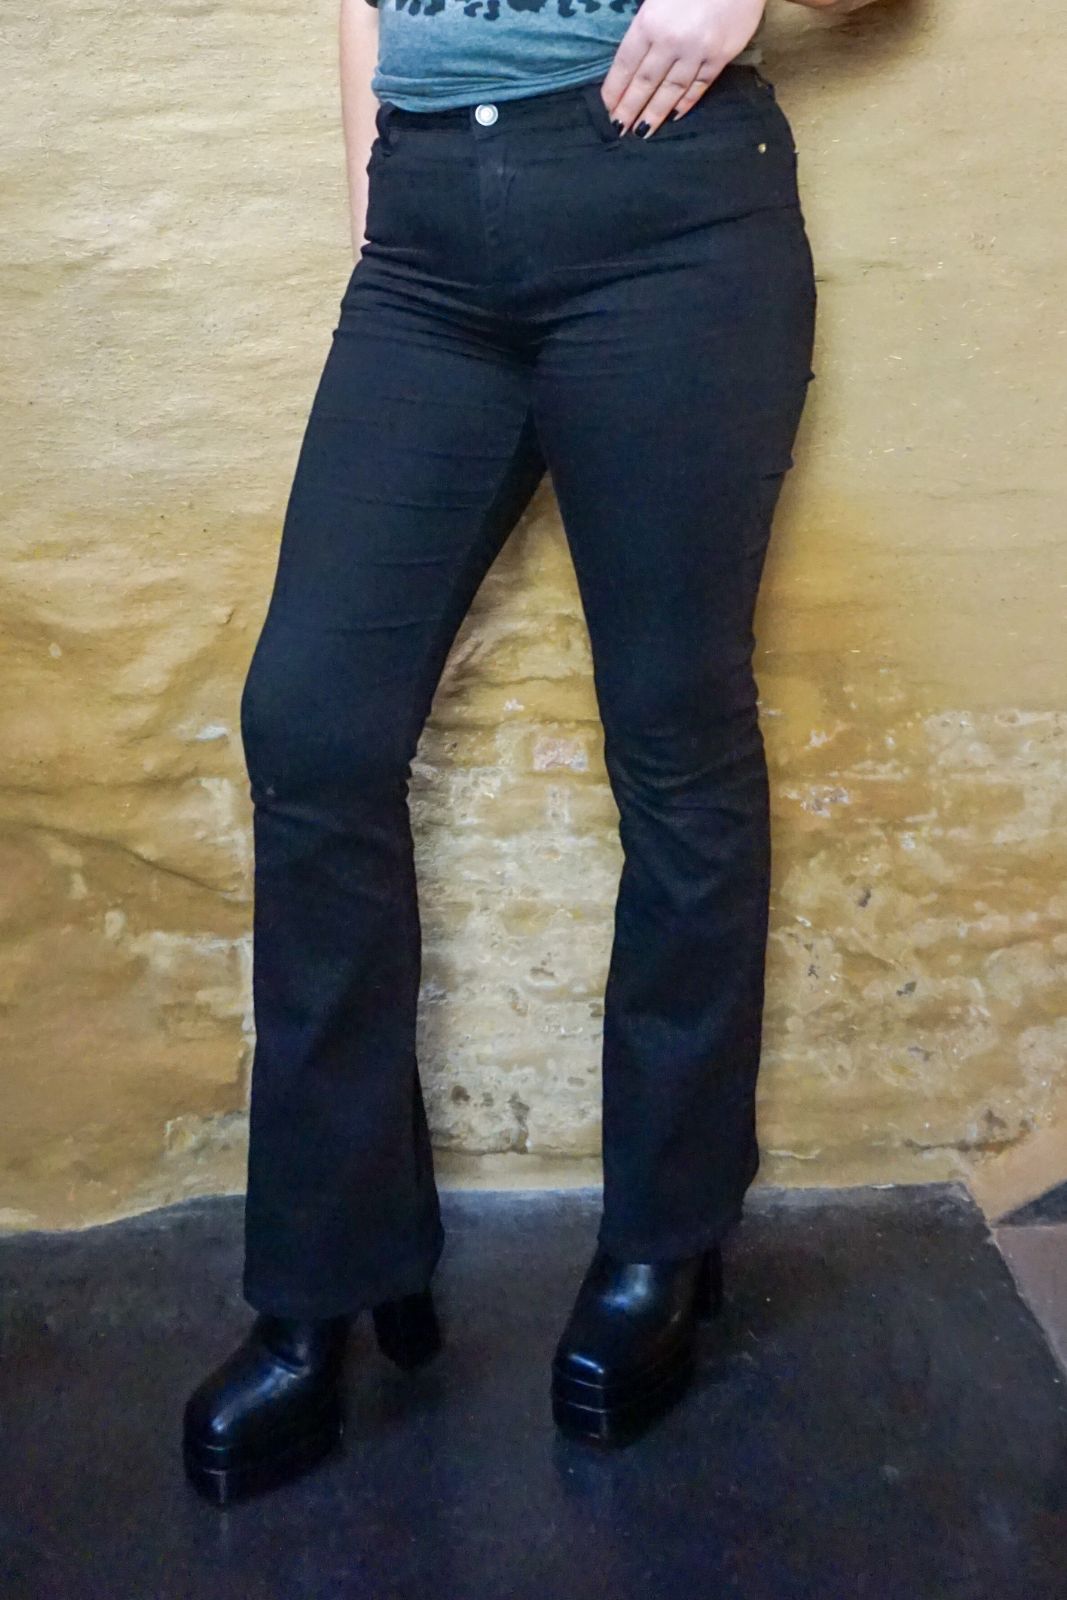 Black high waisted bootcut trousers